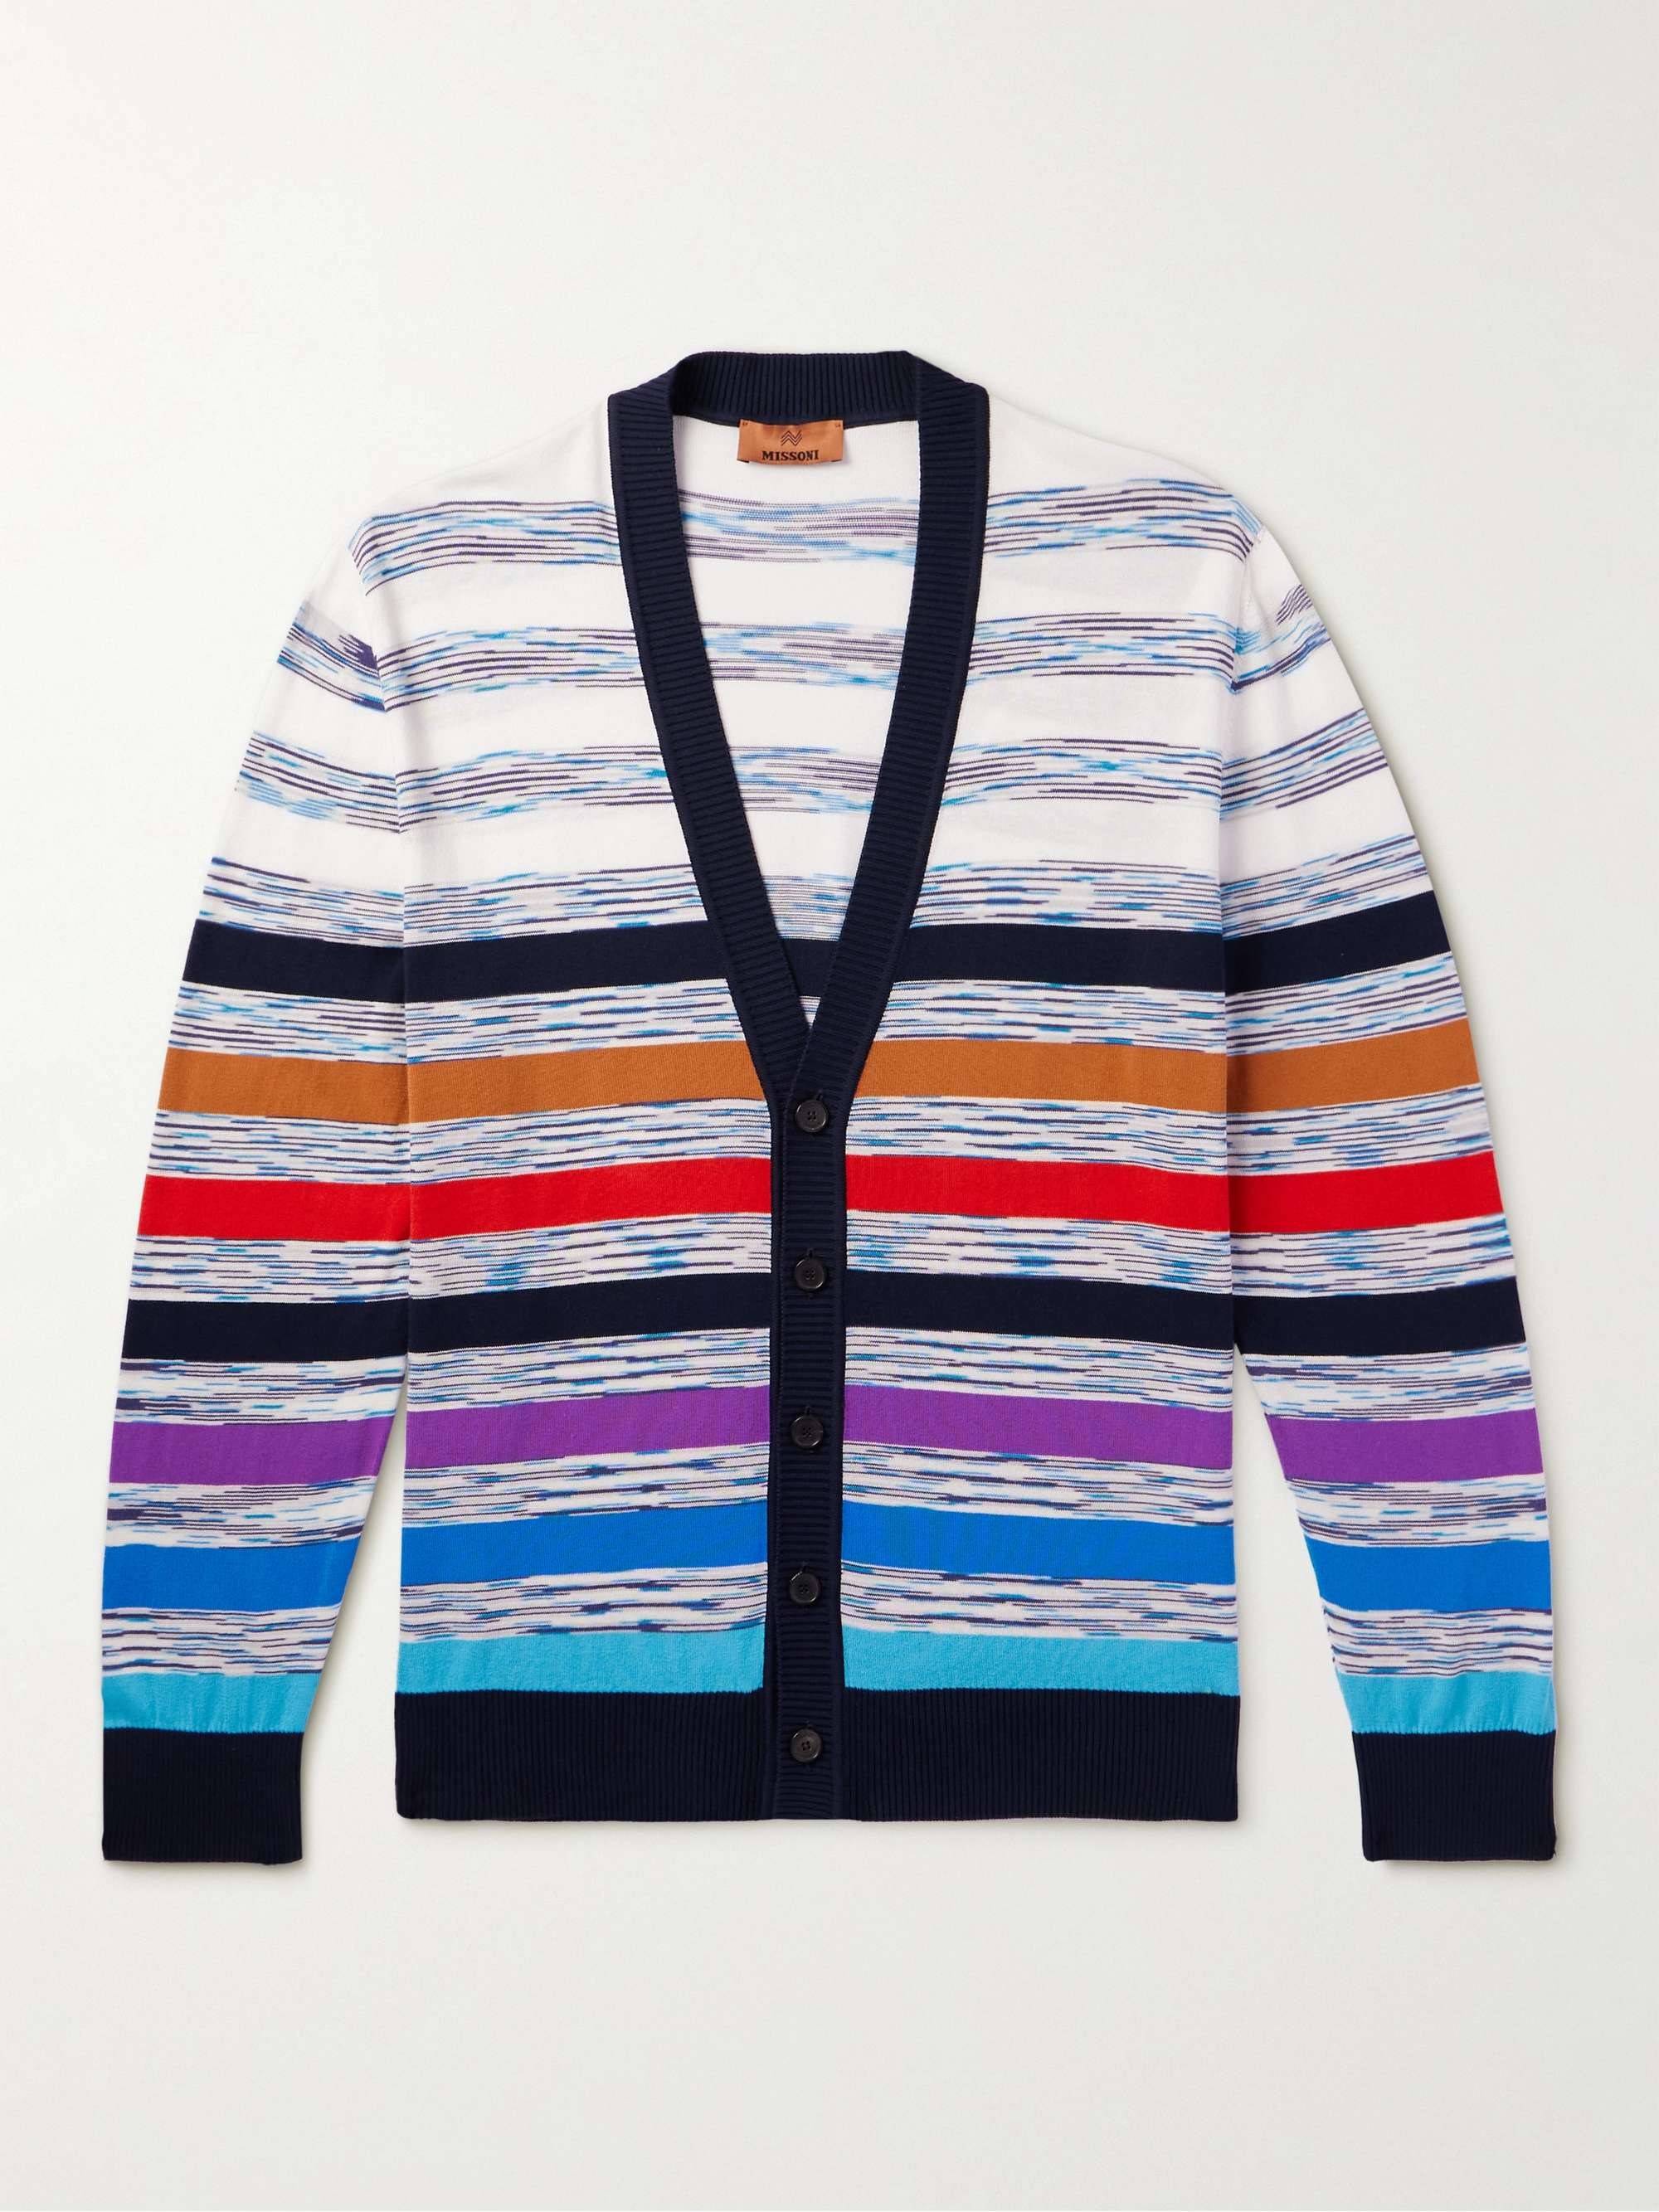 MISSONI Striped Space-Dyed Cotton Cardigan for Men | MR PORTER